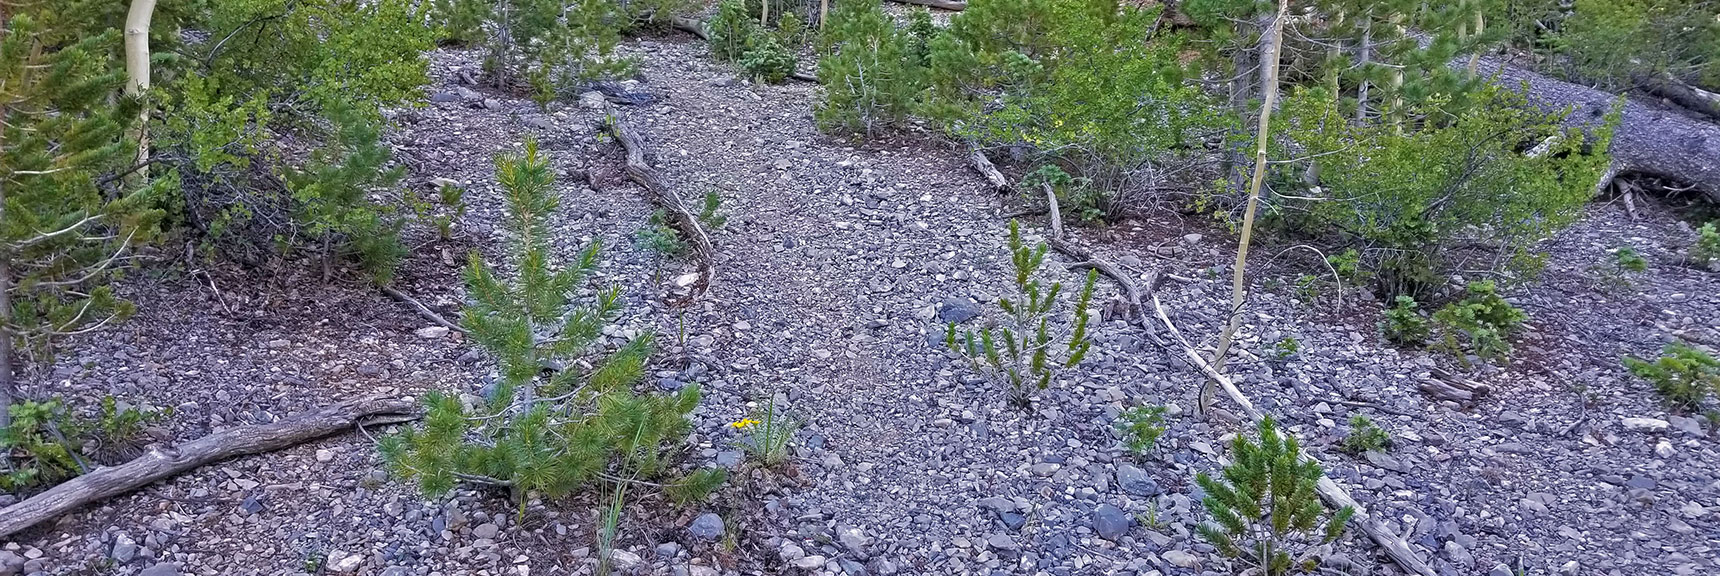 Side Trail to Foxtail Springs. Created by Girl Scouts? | Lee to Kyle Canyon | Foxtail Approach | Mt Charleston Wilderness | Spring Mountains, Nevada